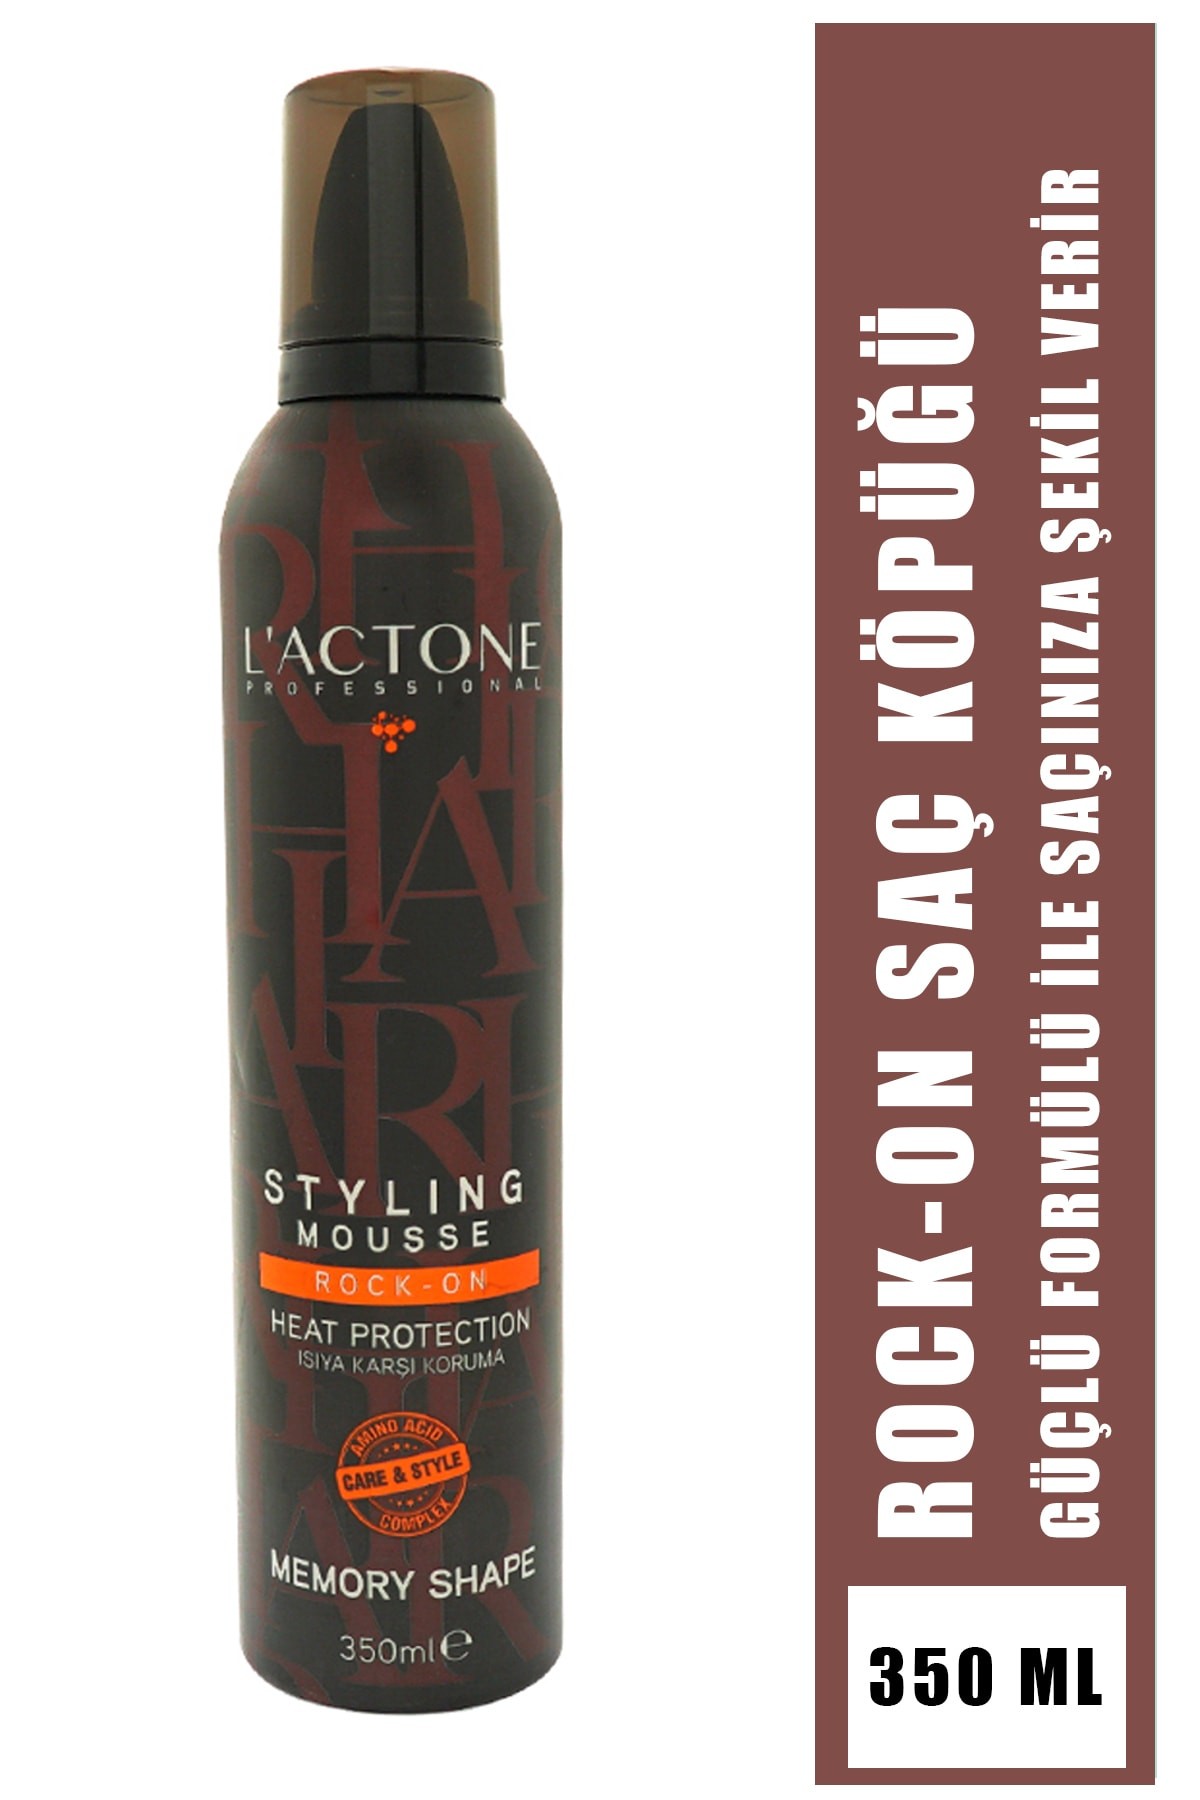 Professional Styling Mousse Rock-on